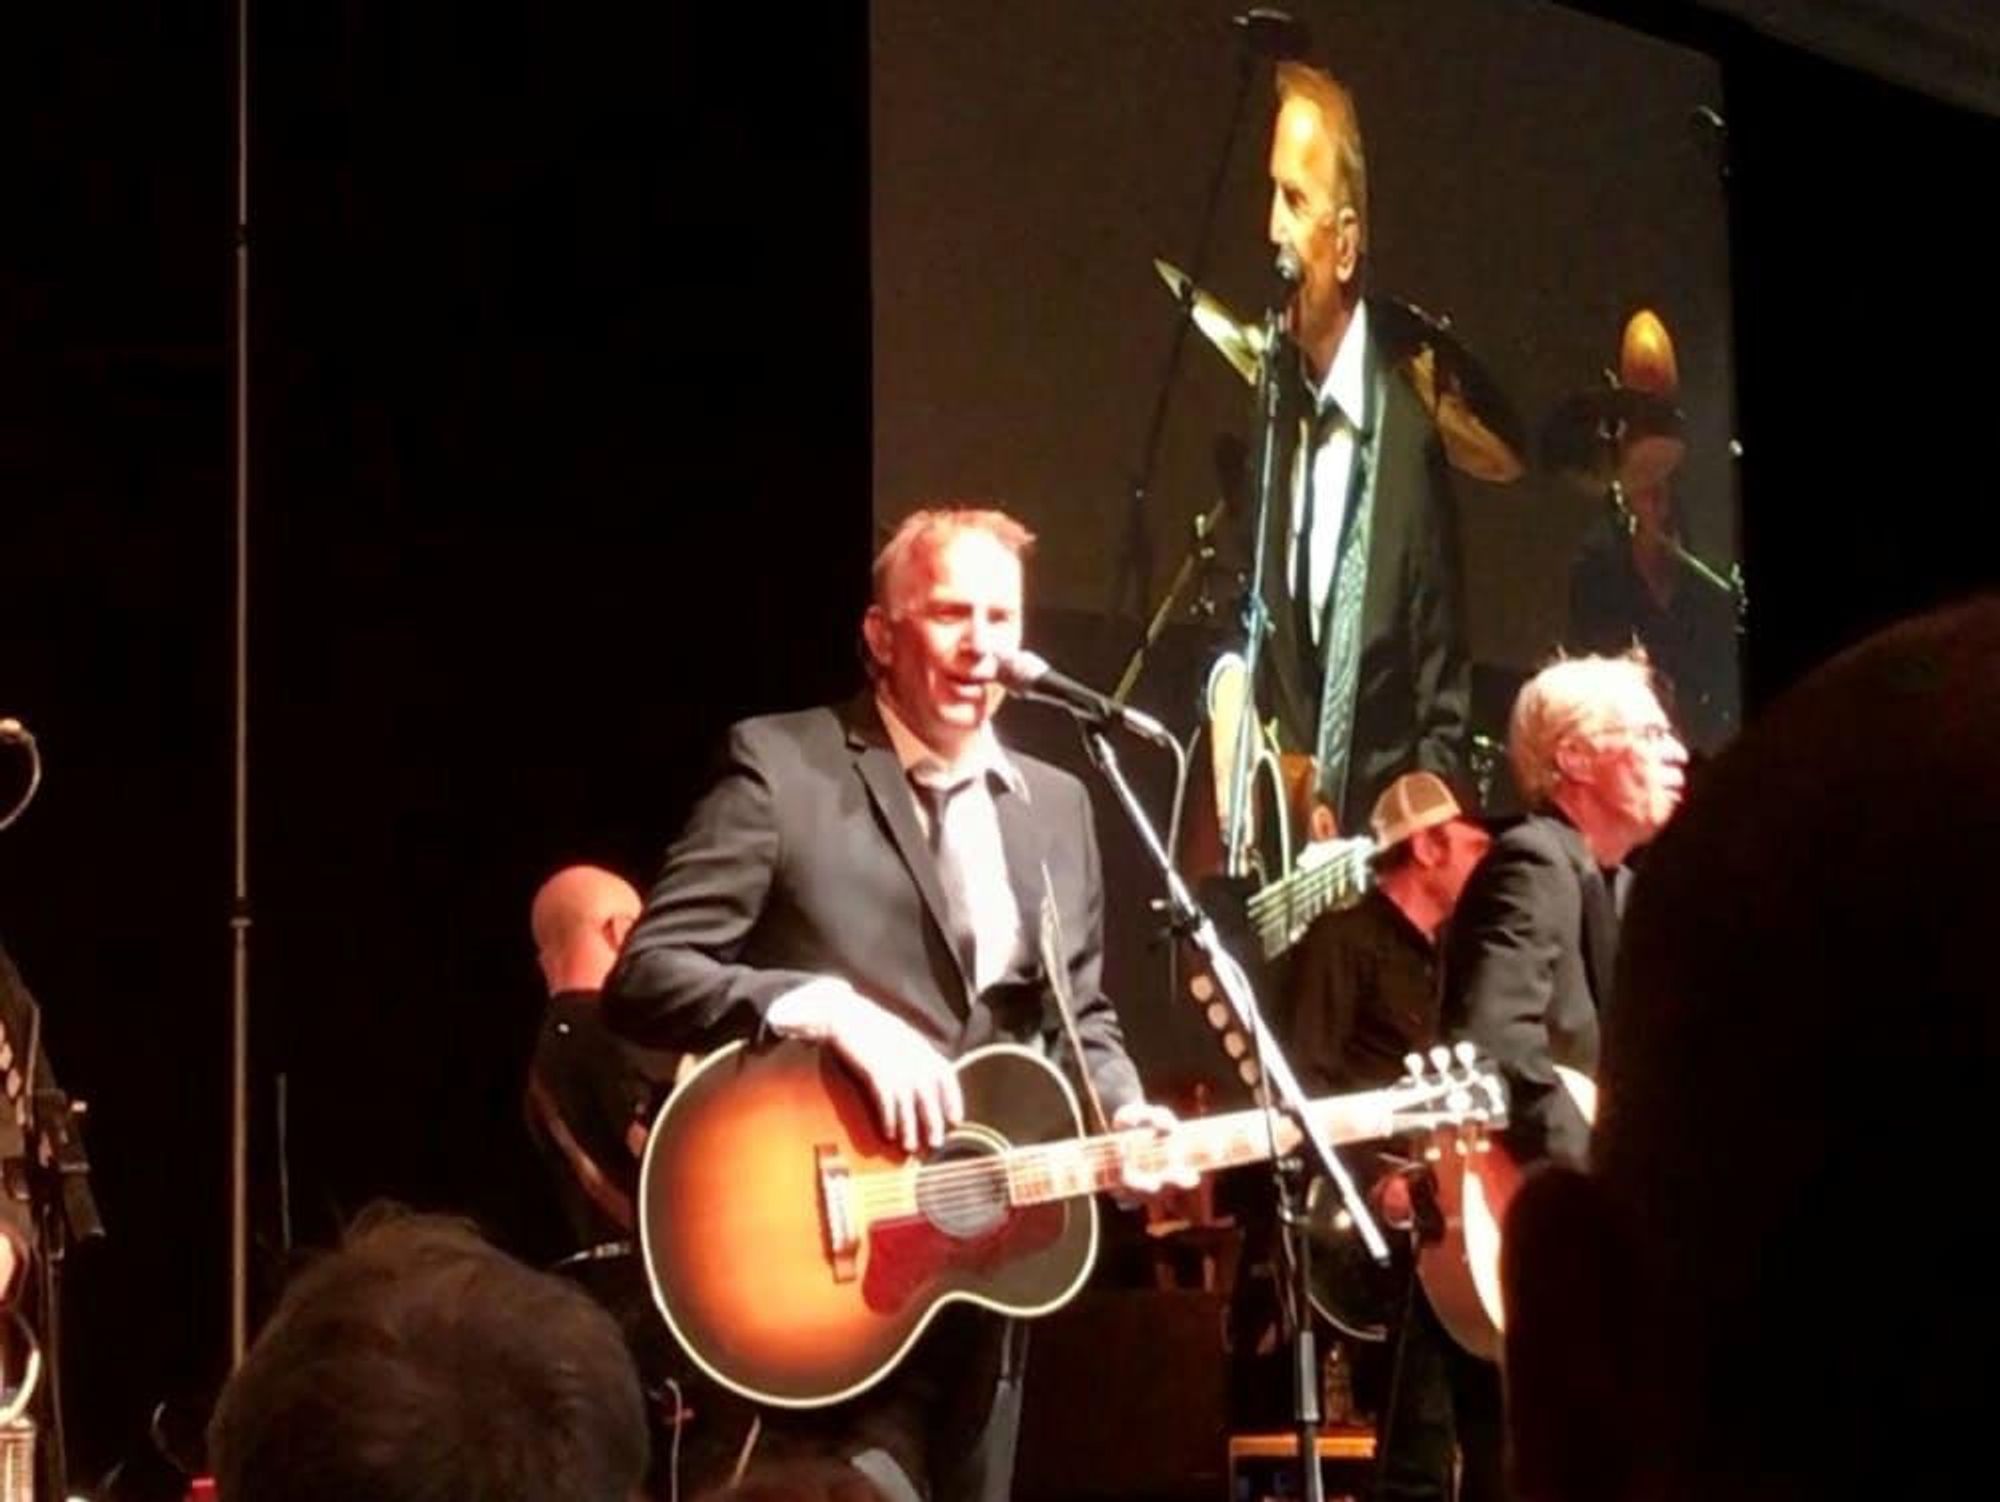 Kevin Costner & Modern West were the featured entertainers.